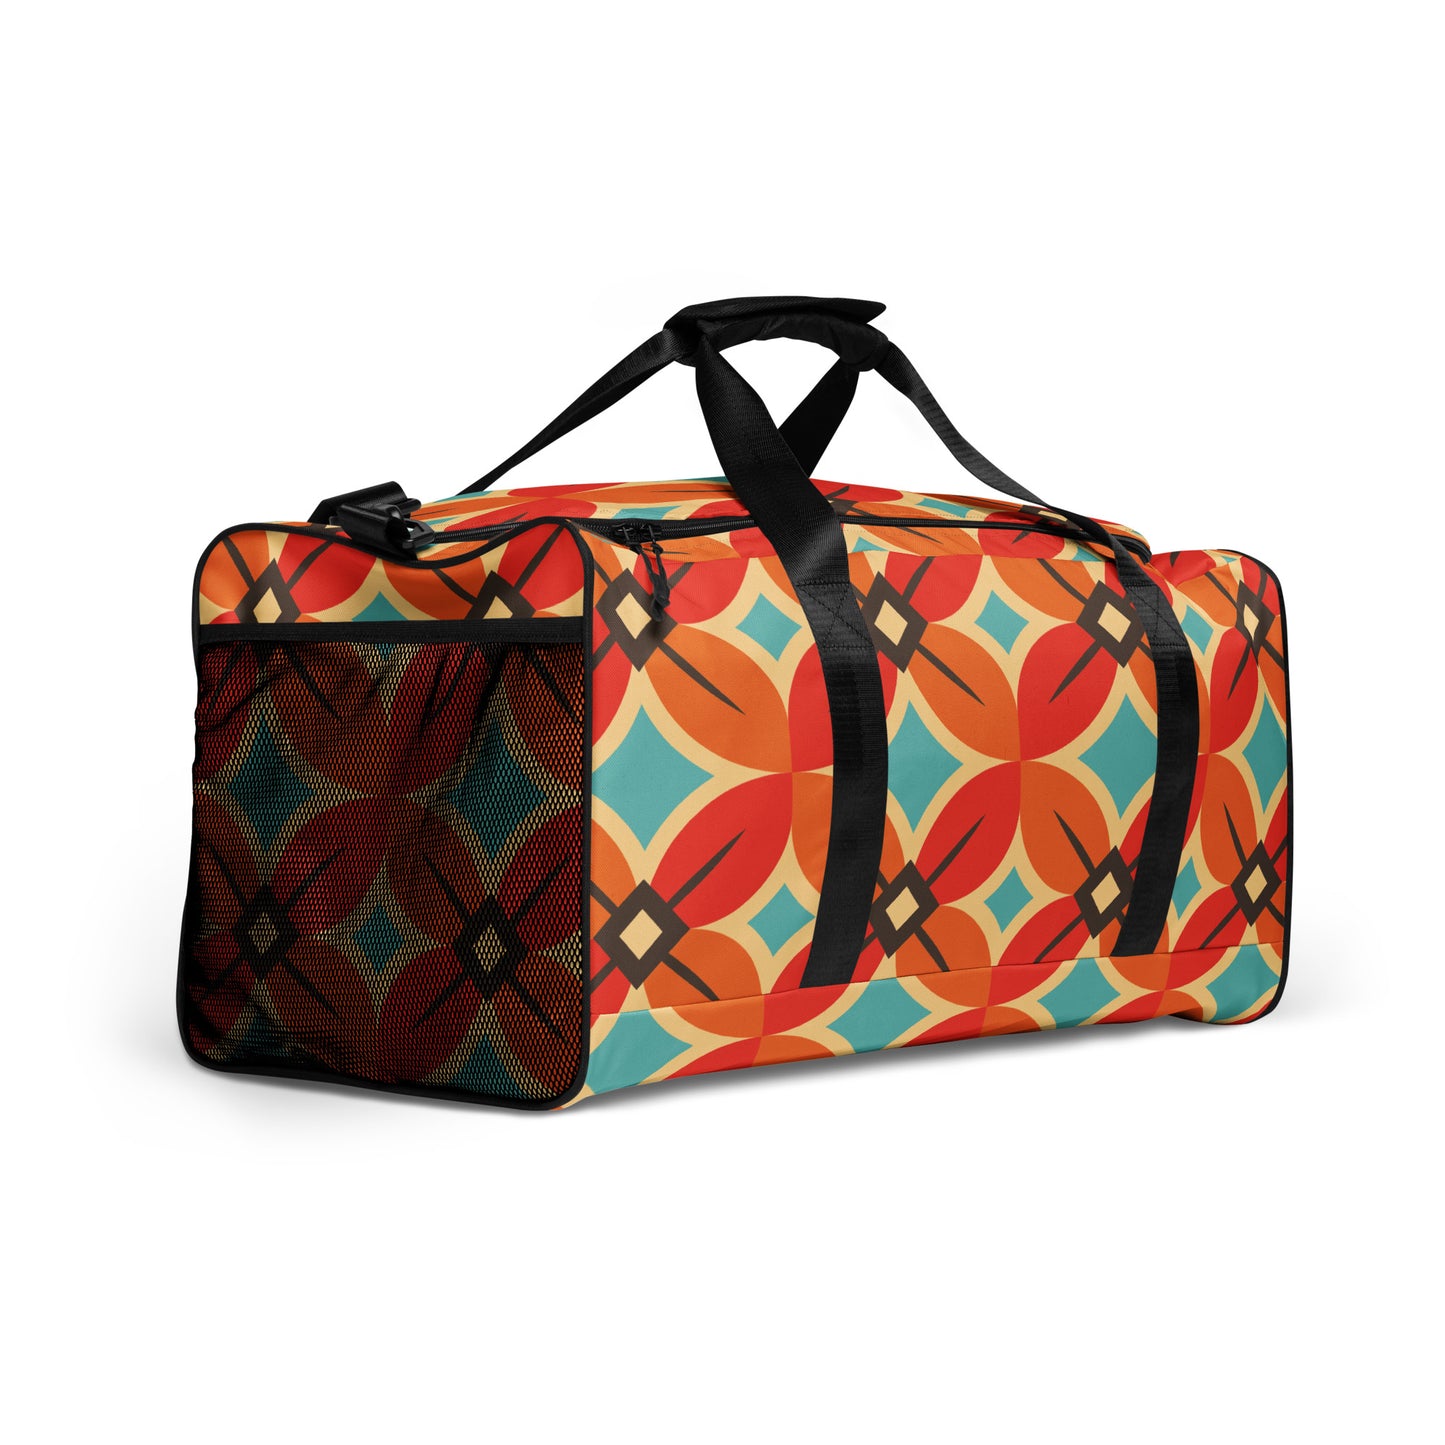 Retro Flower Pattern - Sustainably Made Duffle Bag